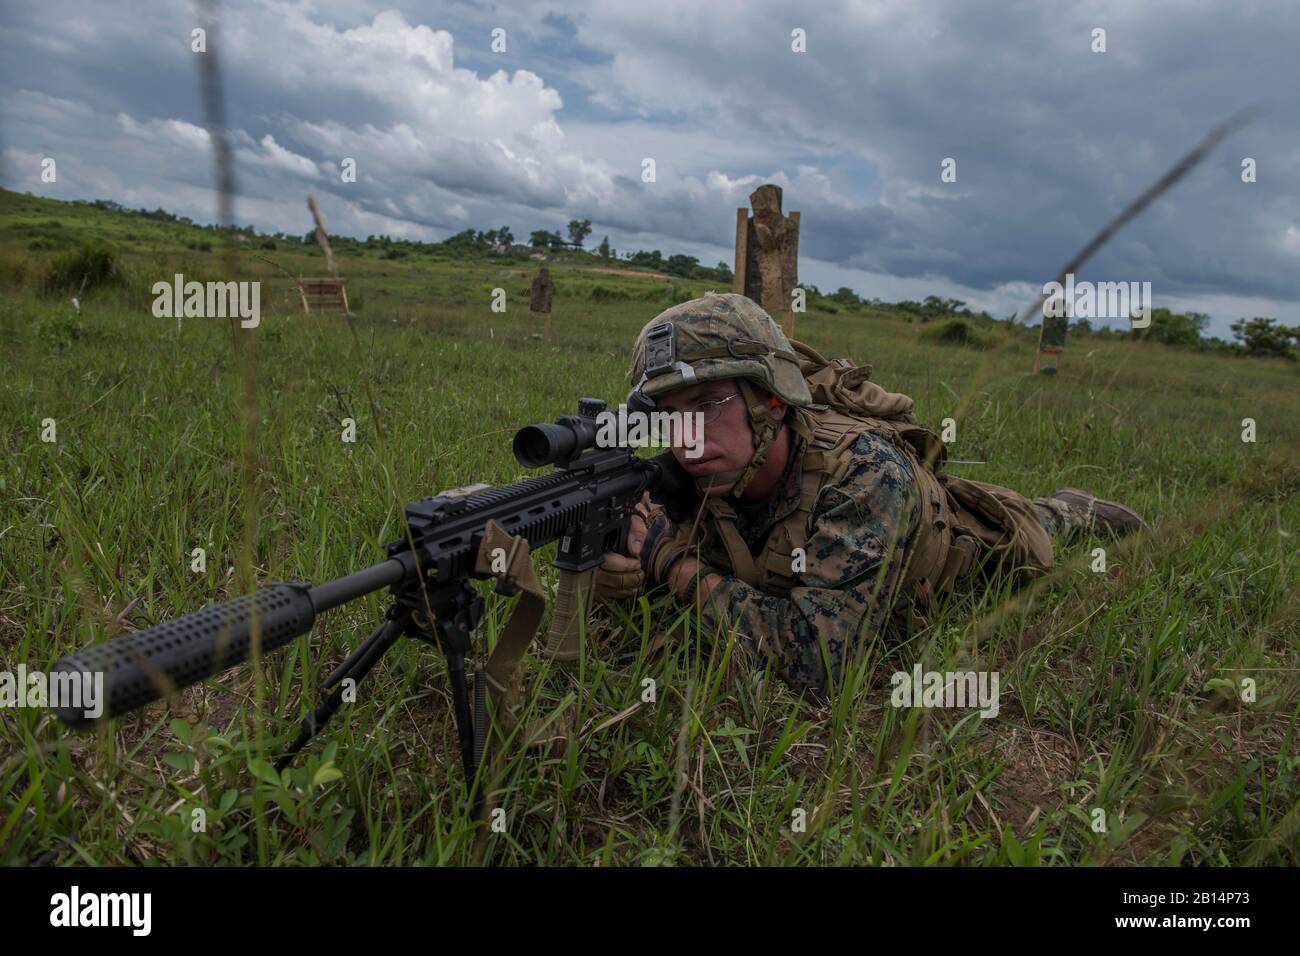 U.S. Marine Corps Lance Cpl. Benjamin Lankford, assigned to 2nd Battalion, 8th Marine Regiment, participates in a field exercise in Chanthaburi, Thialiand, June 17, 2018, in support of Cooperation Afloat Readiness and Training (CARAT) Thailand 2018. The CARAT exercise series, in its 24th iteration, highlights the skill and will of regional partners to cooperatively work together towards the common goal of ensuring a secure and stable maritime environment. (U.S. Navy photo by Mass Communication Specialist 3rd Class Lucas T. Hans) Stock Photo